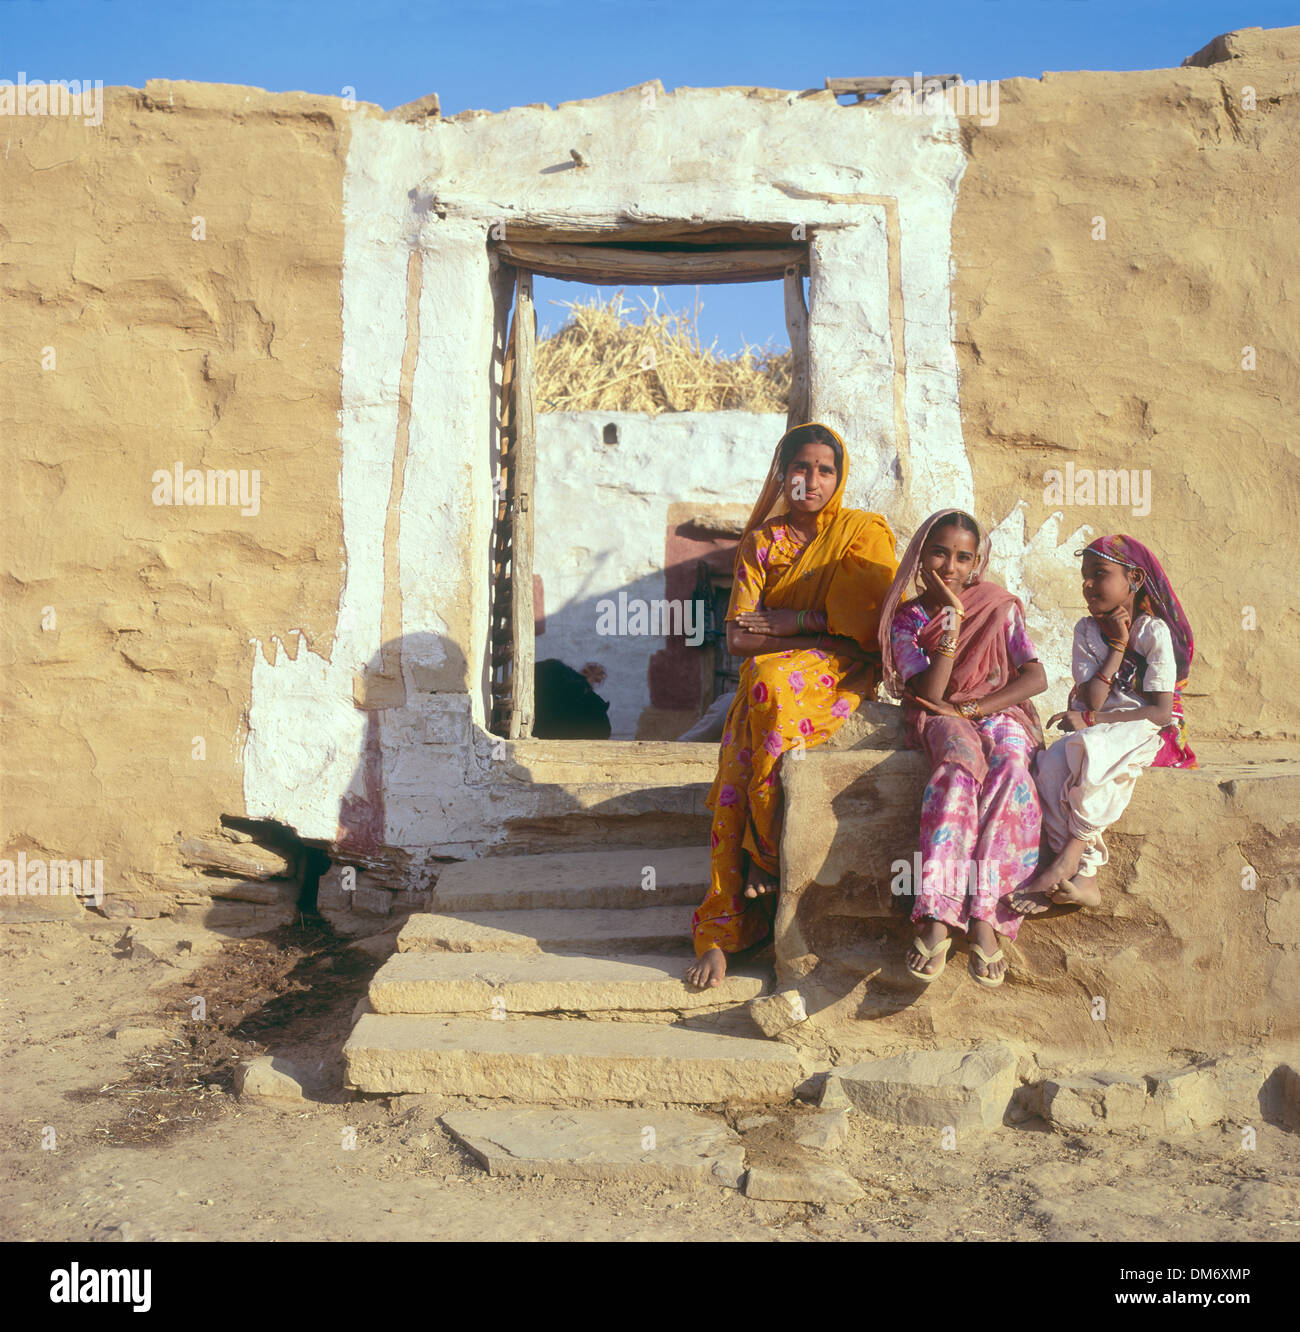 Woman and two girls in Saris outside an adobe house in desert Village outside Jaisalmer, Rajasthan, India, sand coloured walls Stock Photo